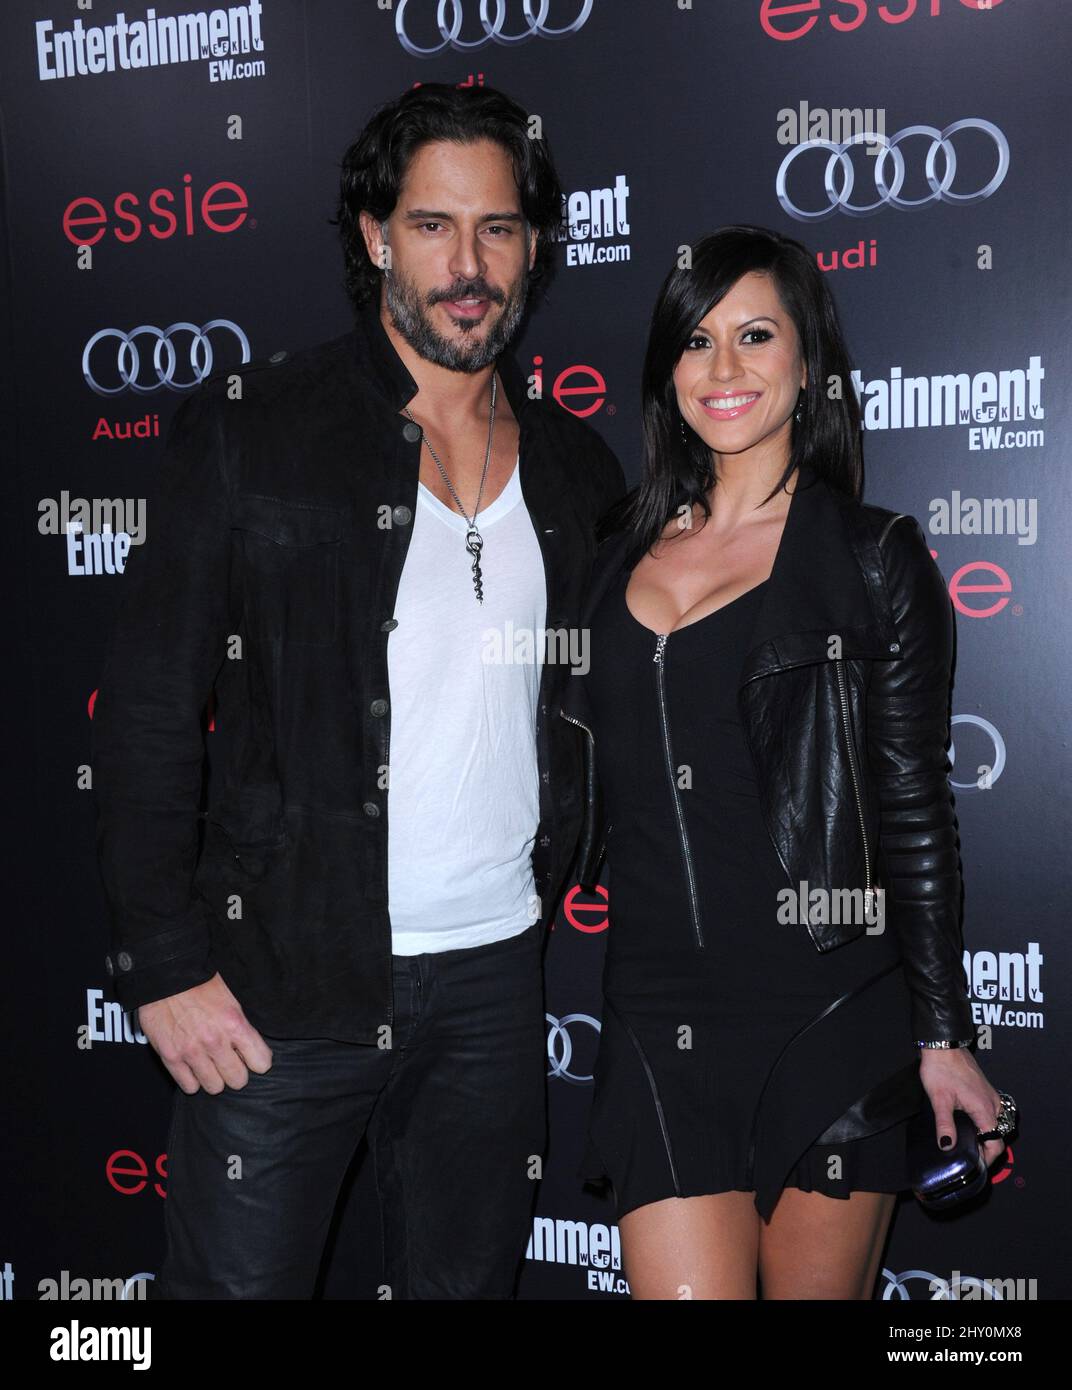 Joe Manganiello and Bridget Peters attending the Entertainment Weekly Pre-SAG Party hosted by Essie and Audi held at the Chateau Marmont in California, USA. Stock Photo